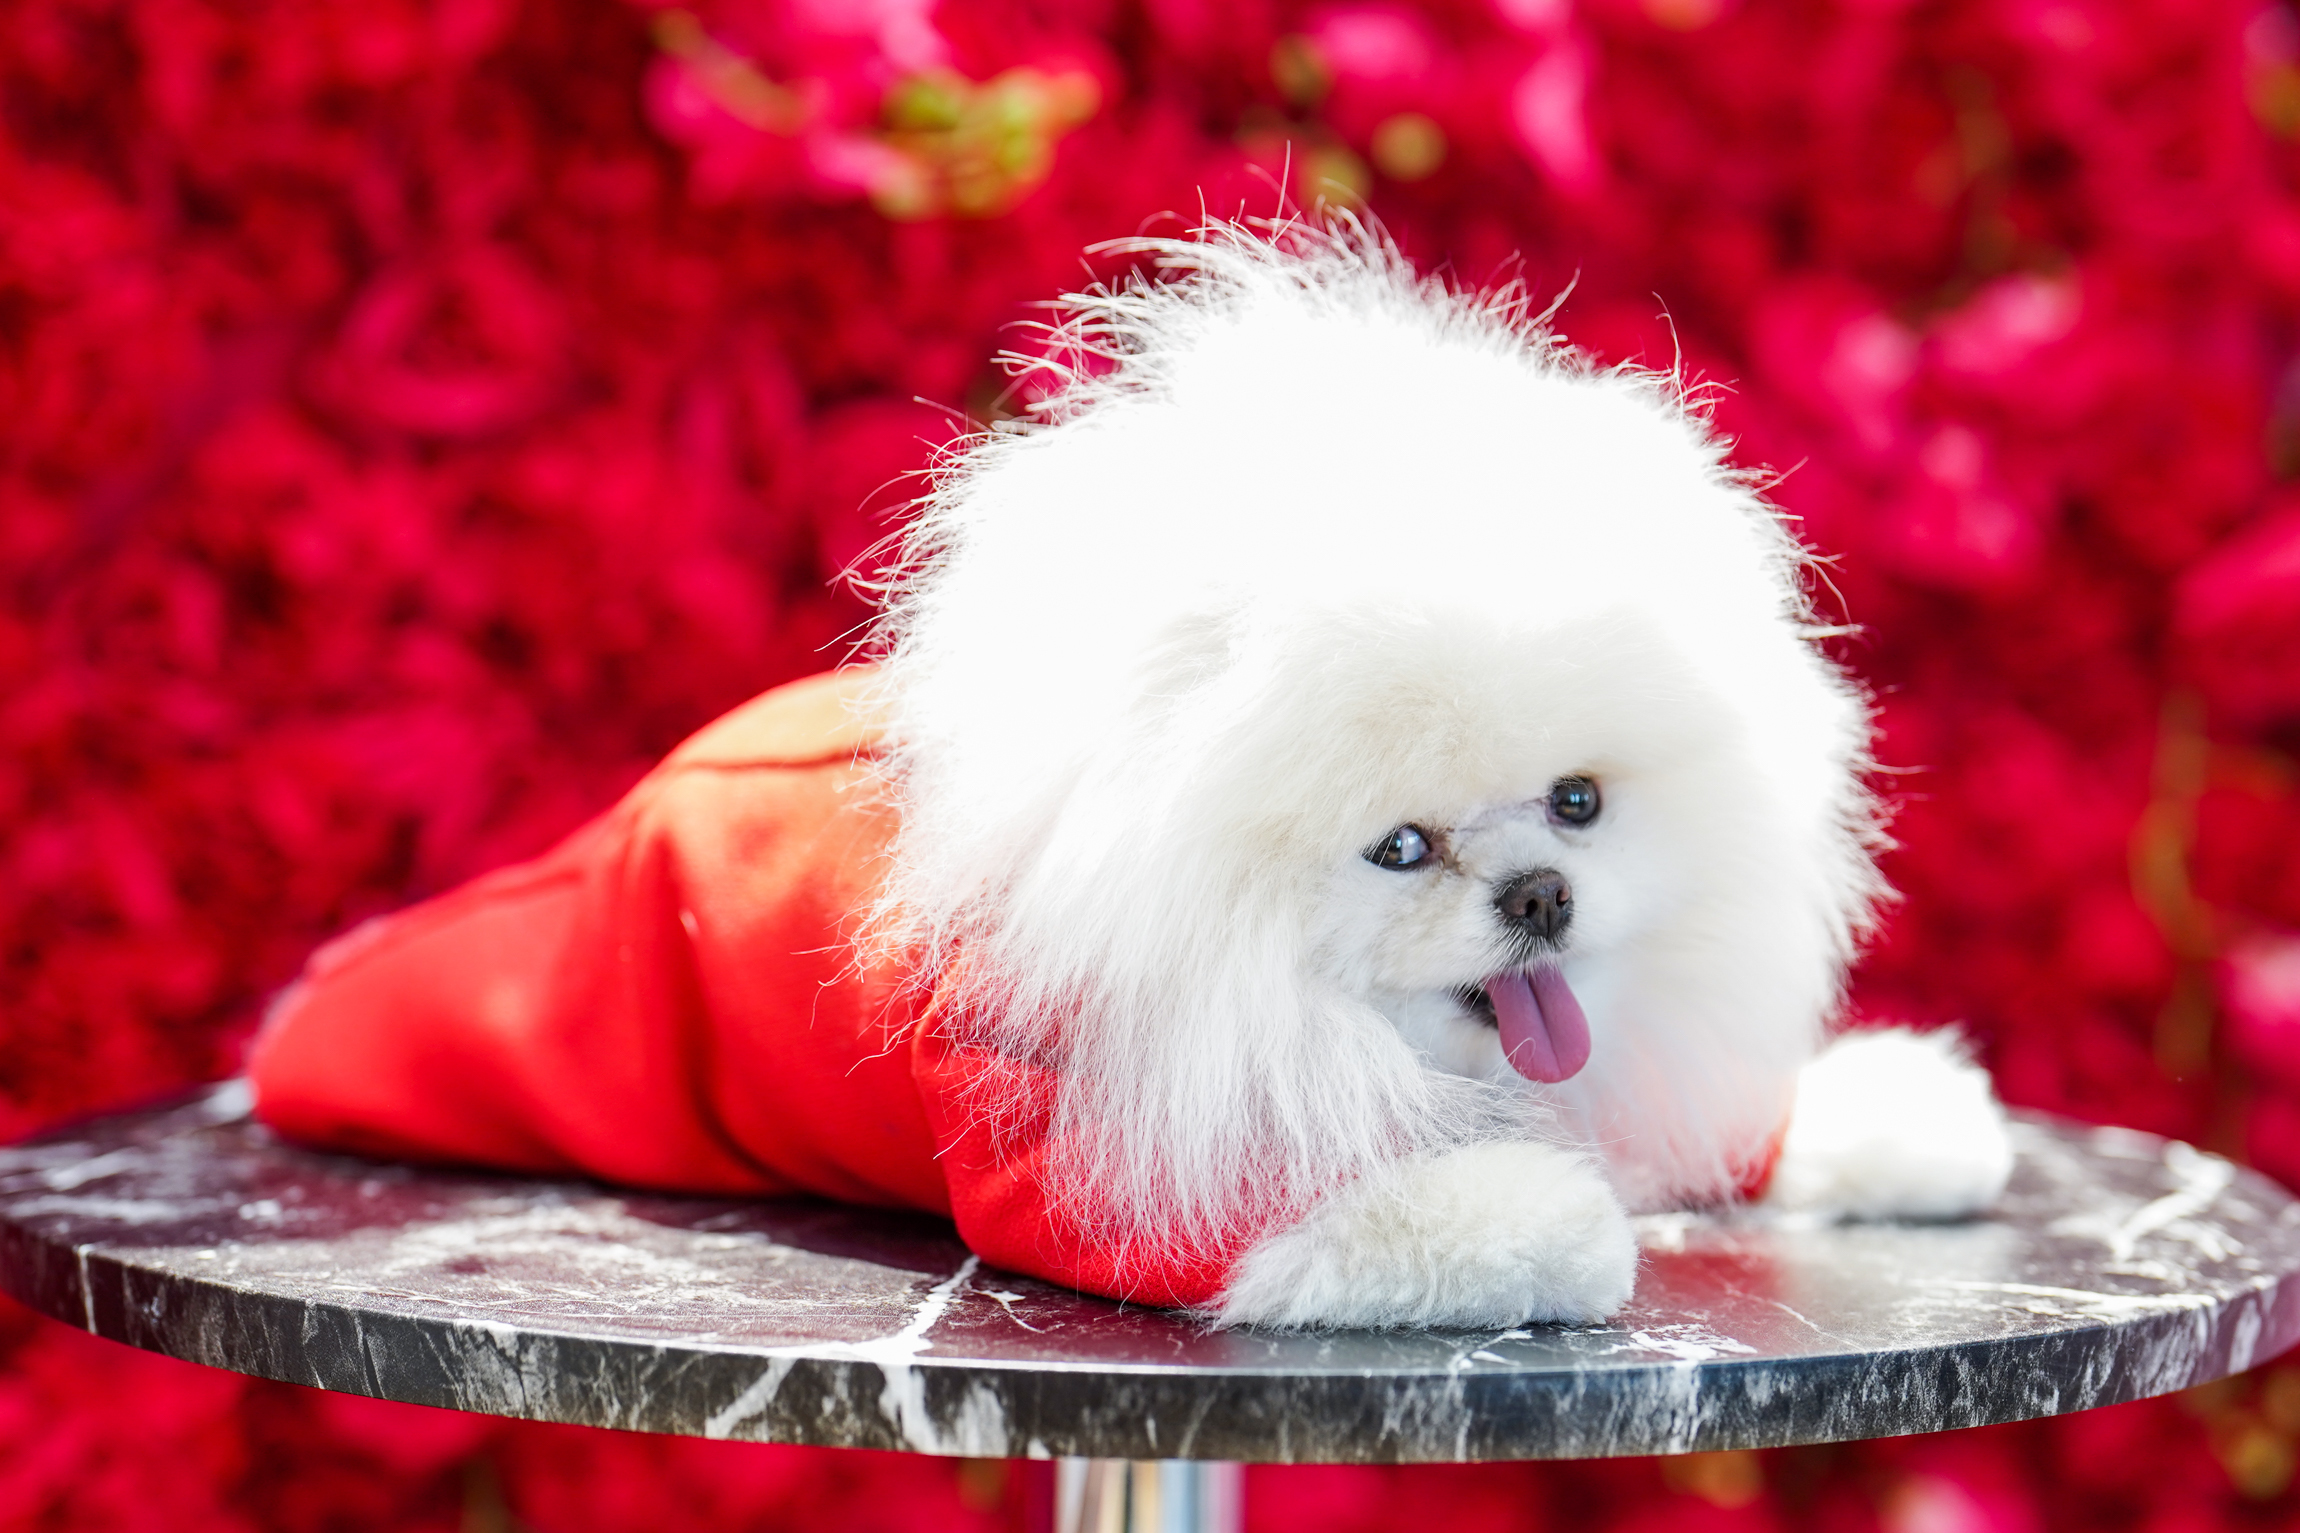 A fluffy white dog at the Pet Gala in a red dress.